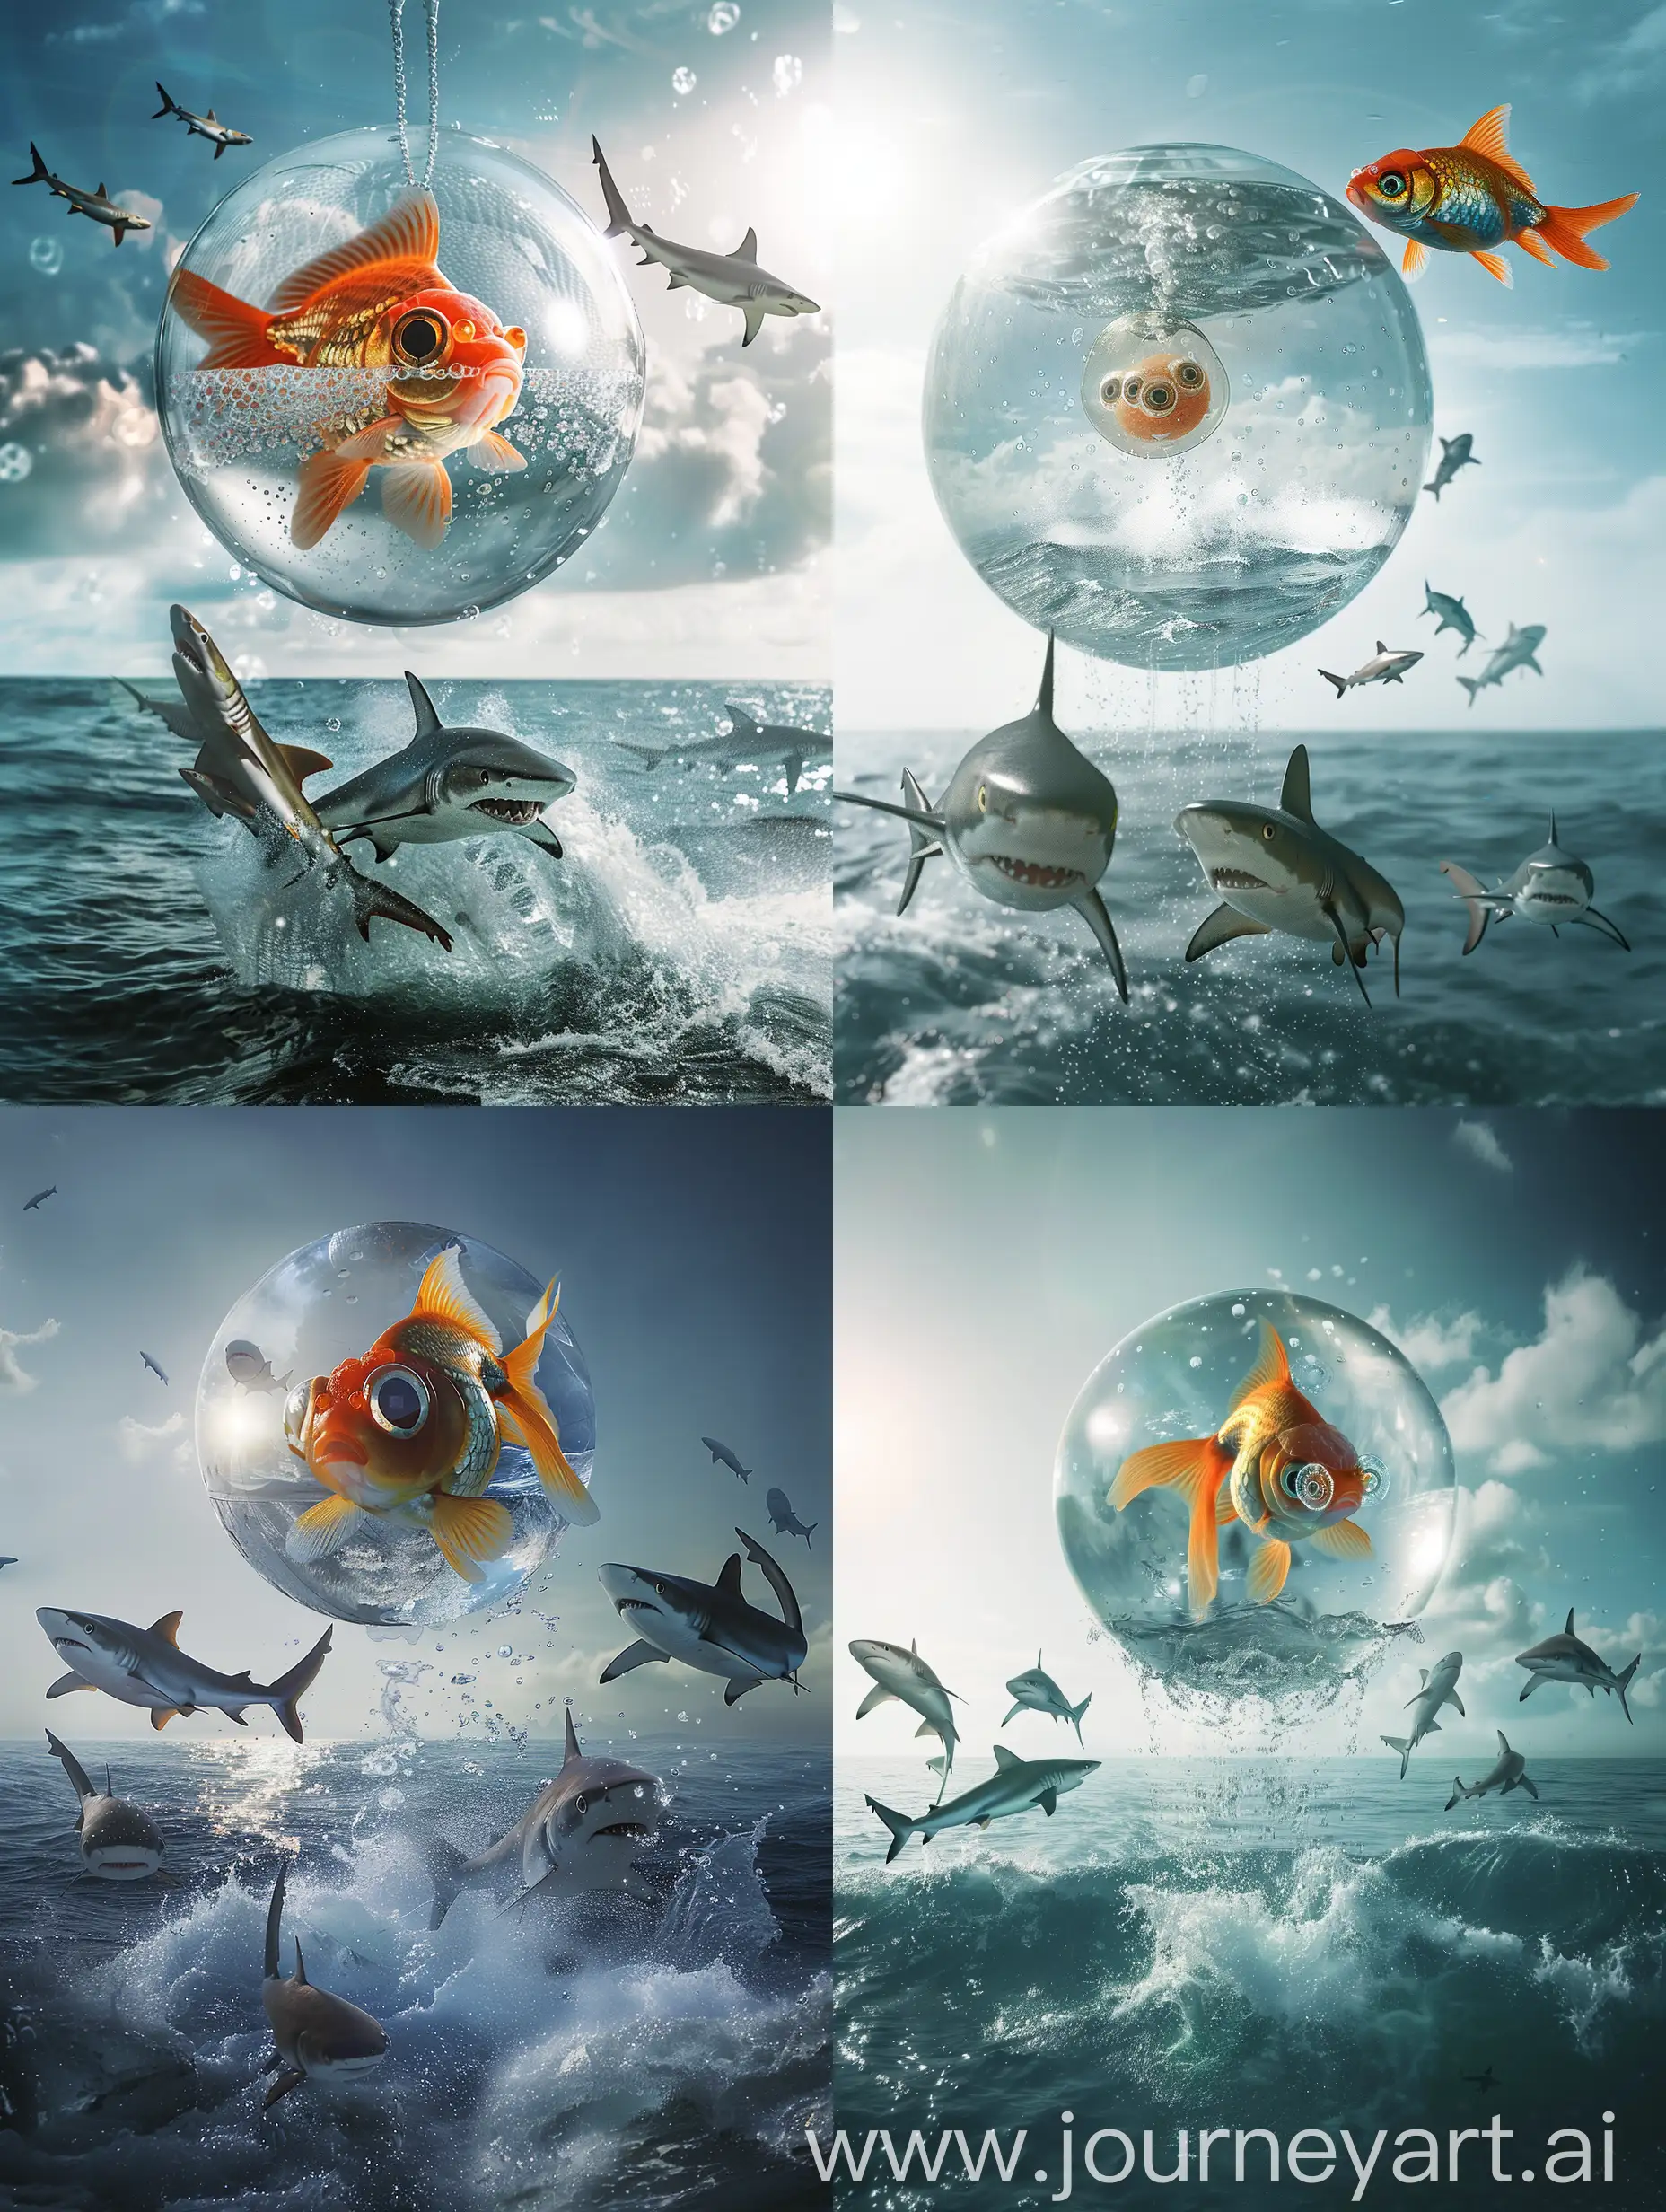 Oceanic-Contrast-Goldfish-Serenity-Amidst-Leaping-Sharks